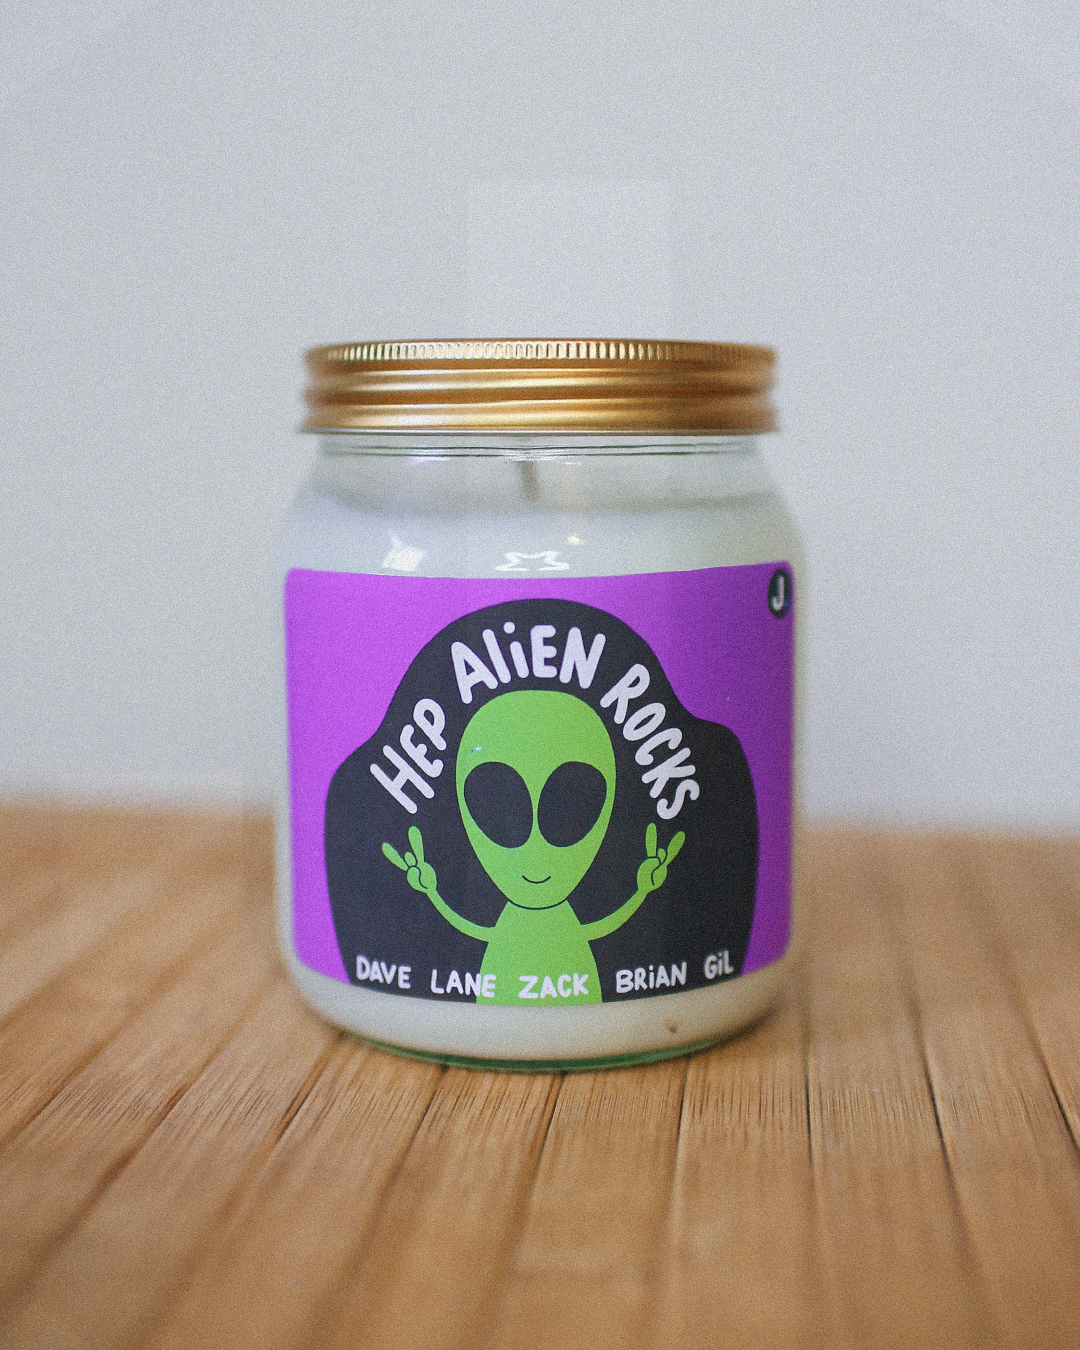 Hep Alien Rocks! Gilmore Girls Inspired Candle (Spiced Mandarin And Orange Blossom) - Hep Alien Candle - Lane Kim Rory Gilmore Stars Hollow Candles - Hep Alien Rocks! Gilmore Girls Inspired Candle